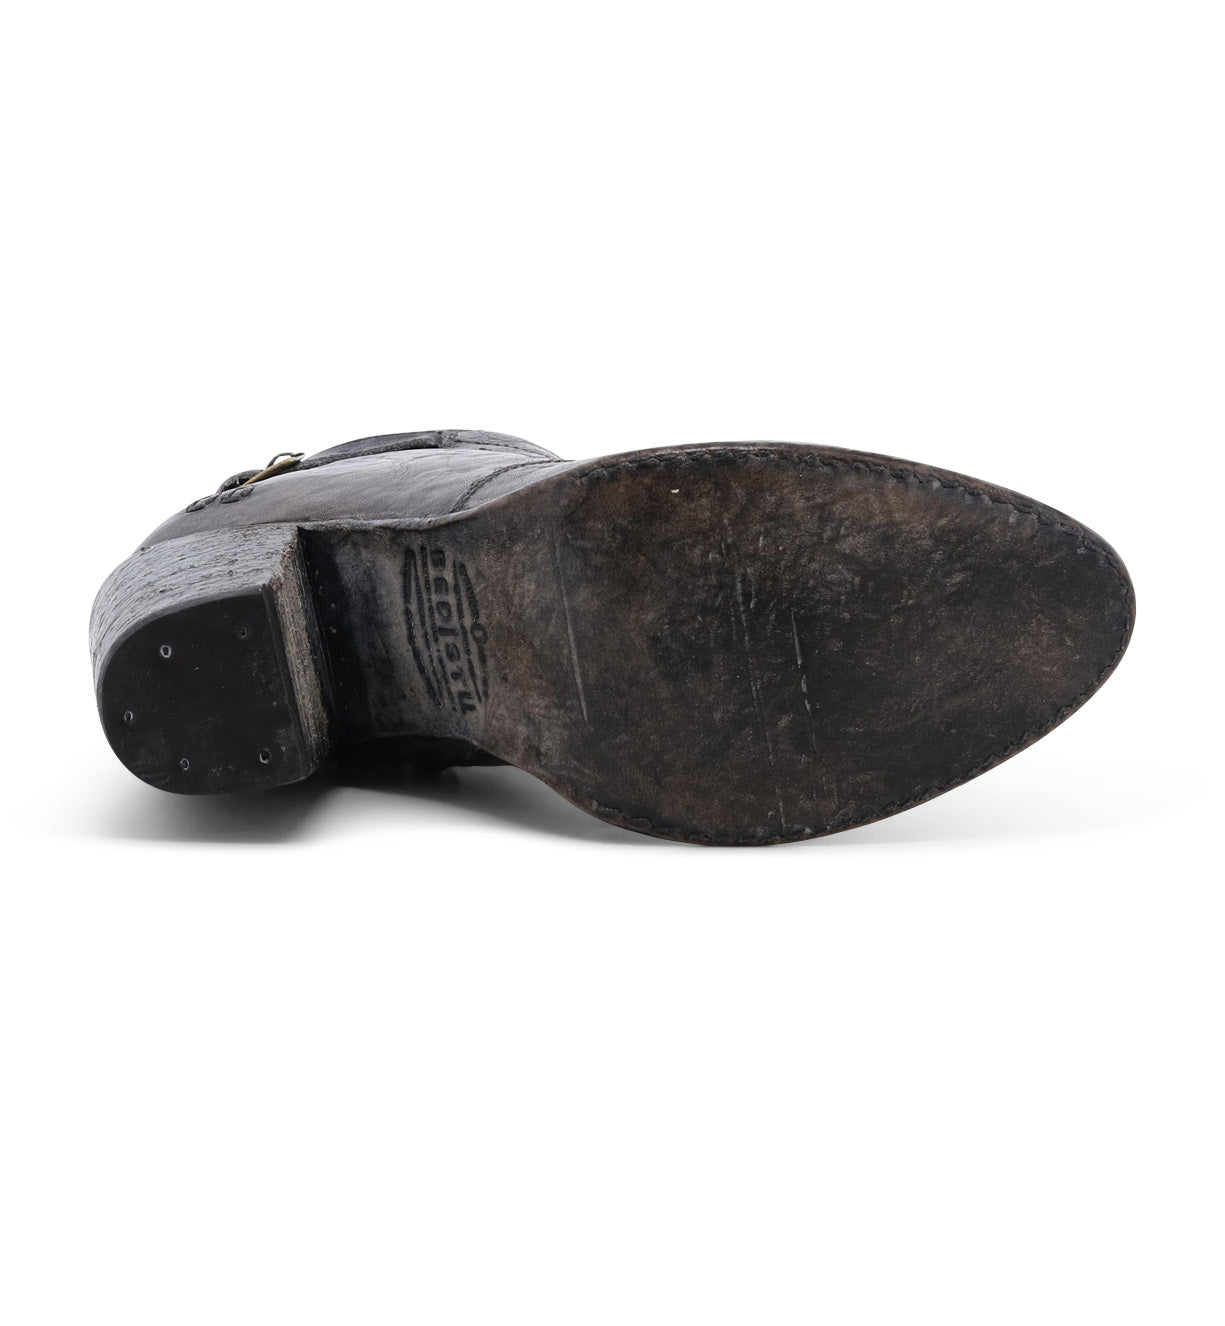 A worn-out Bed Stu Isla leather heeled bootie sole with visible scuff marks and signs of wear.